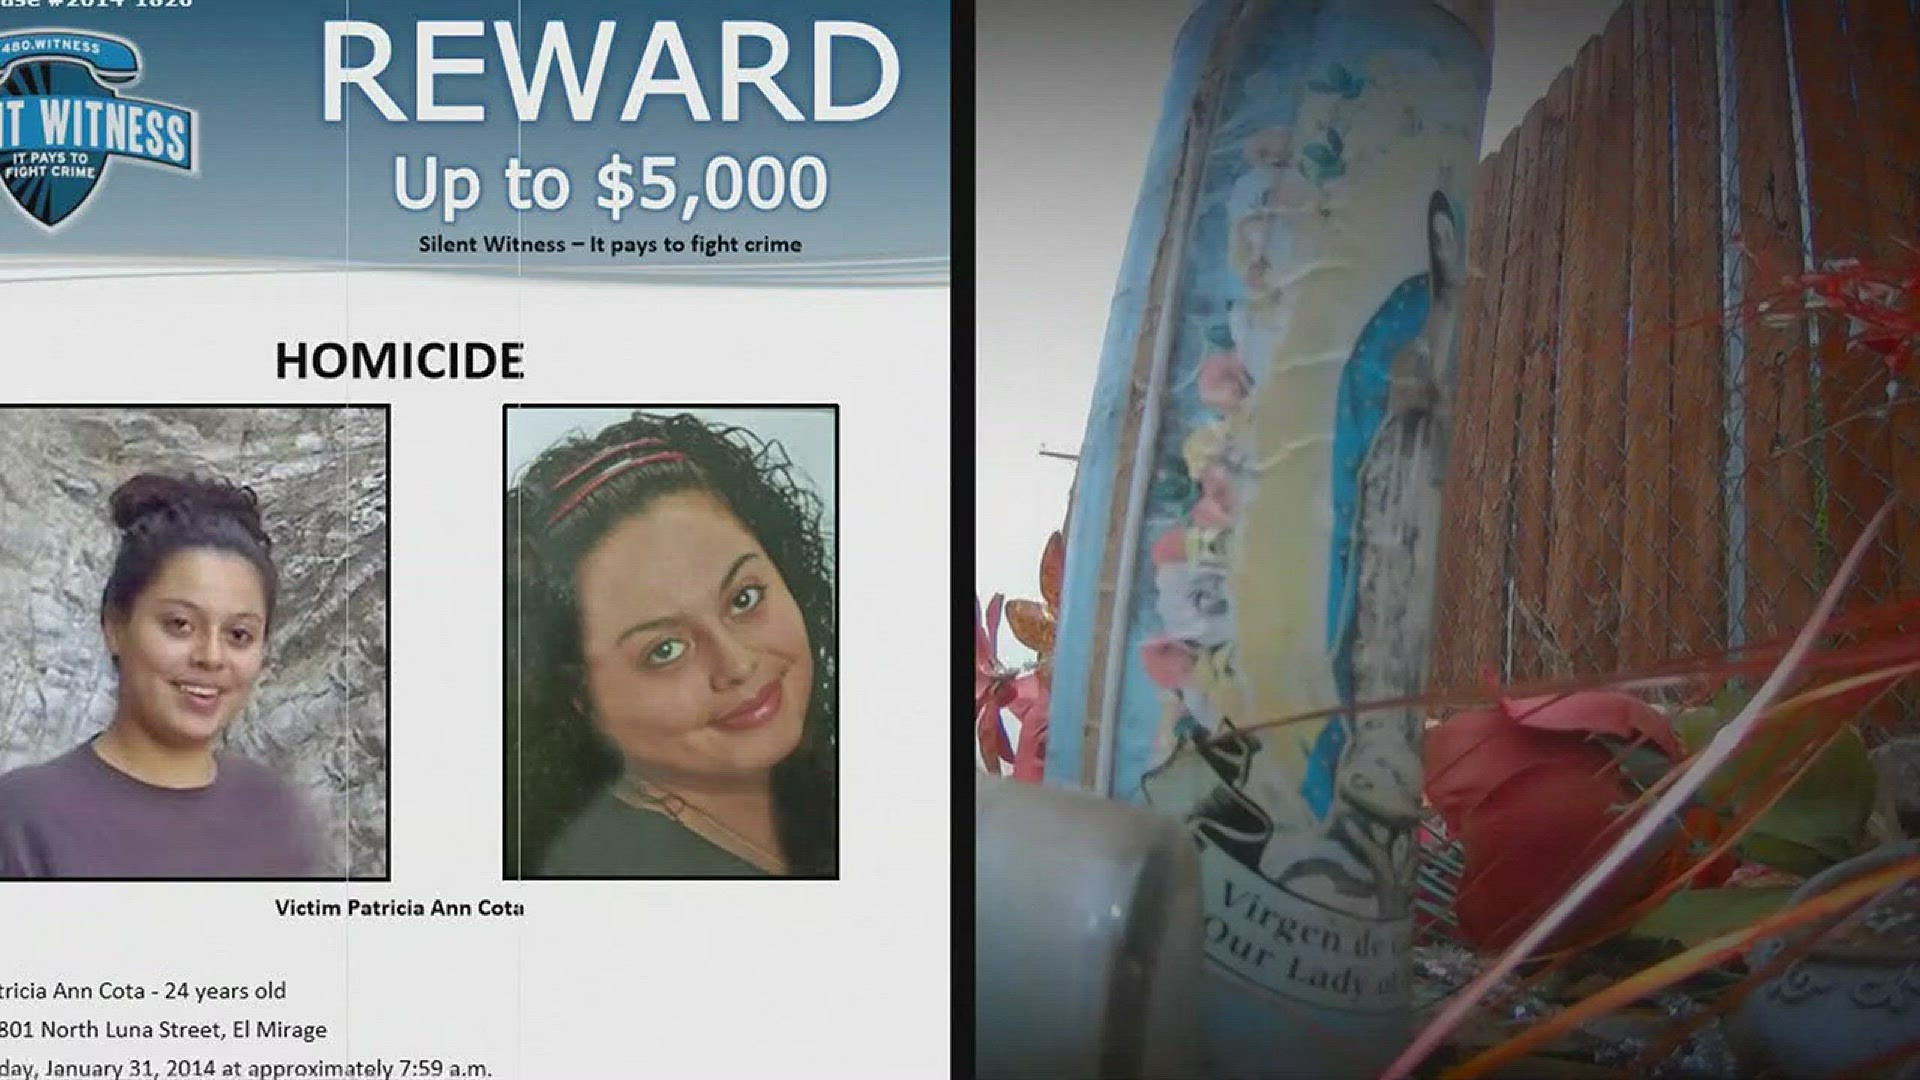 A family is still searching for answers into the death of Patricia Cota, the mother of two young girls.